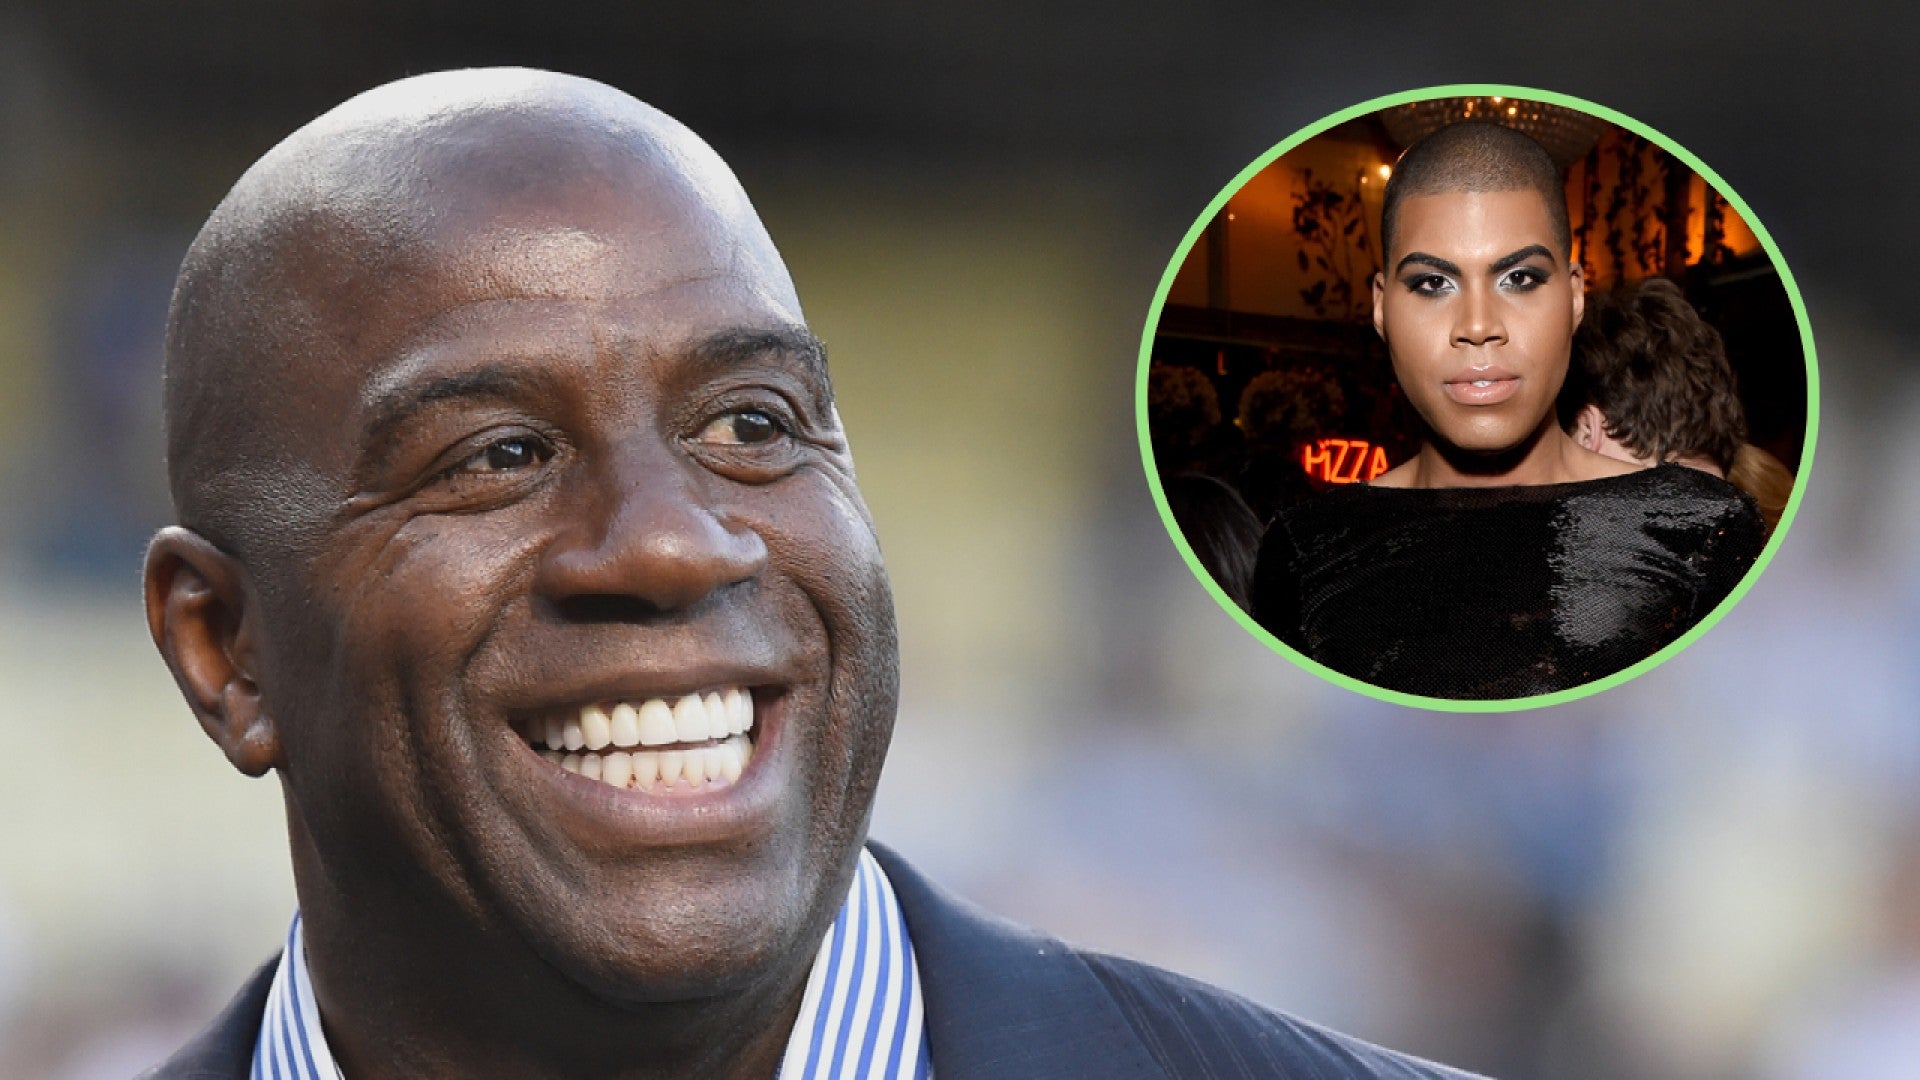 Magic Johnson says his son EJ's coming out 'changed' him